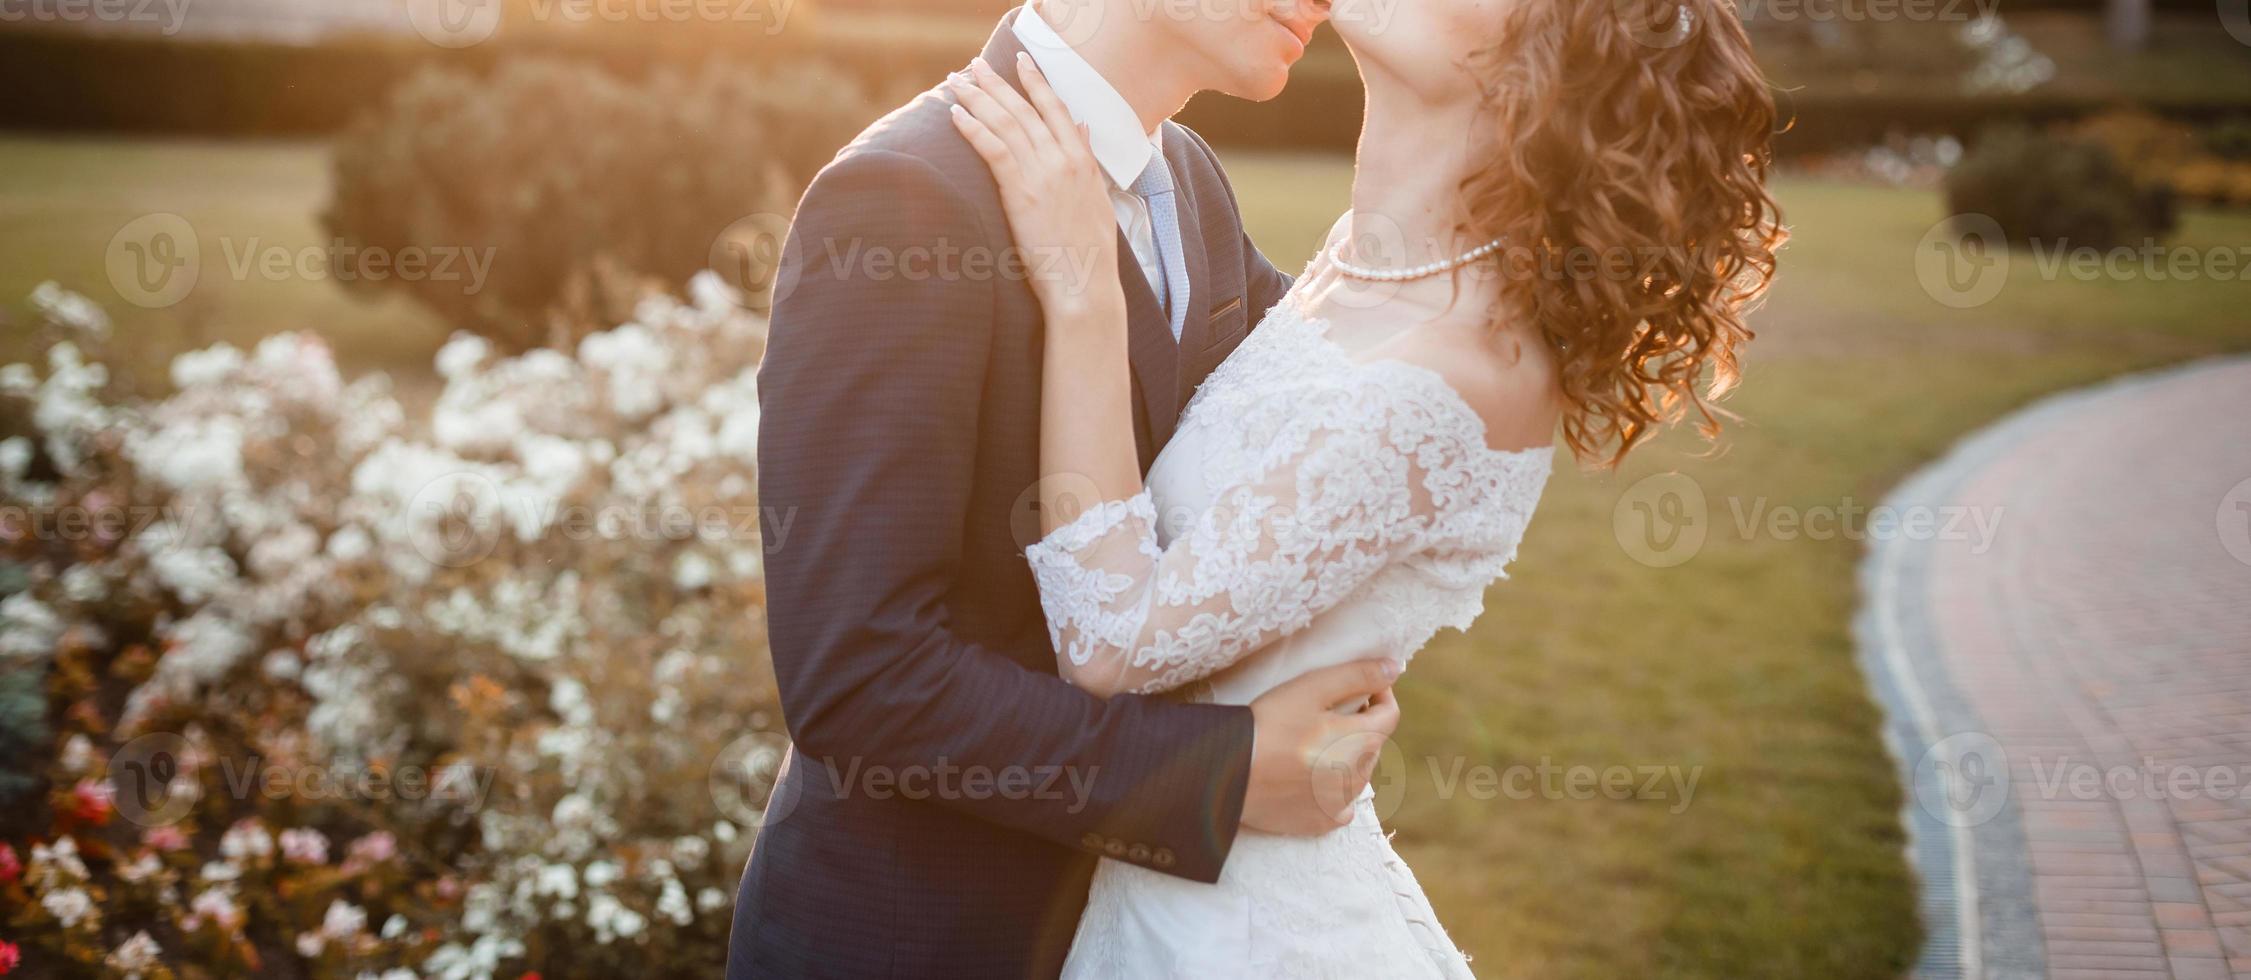 Sunshine portrait of happy bride and groom outdoor in nature location at sunset warm summertime photo